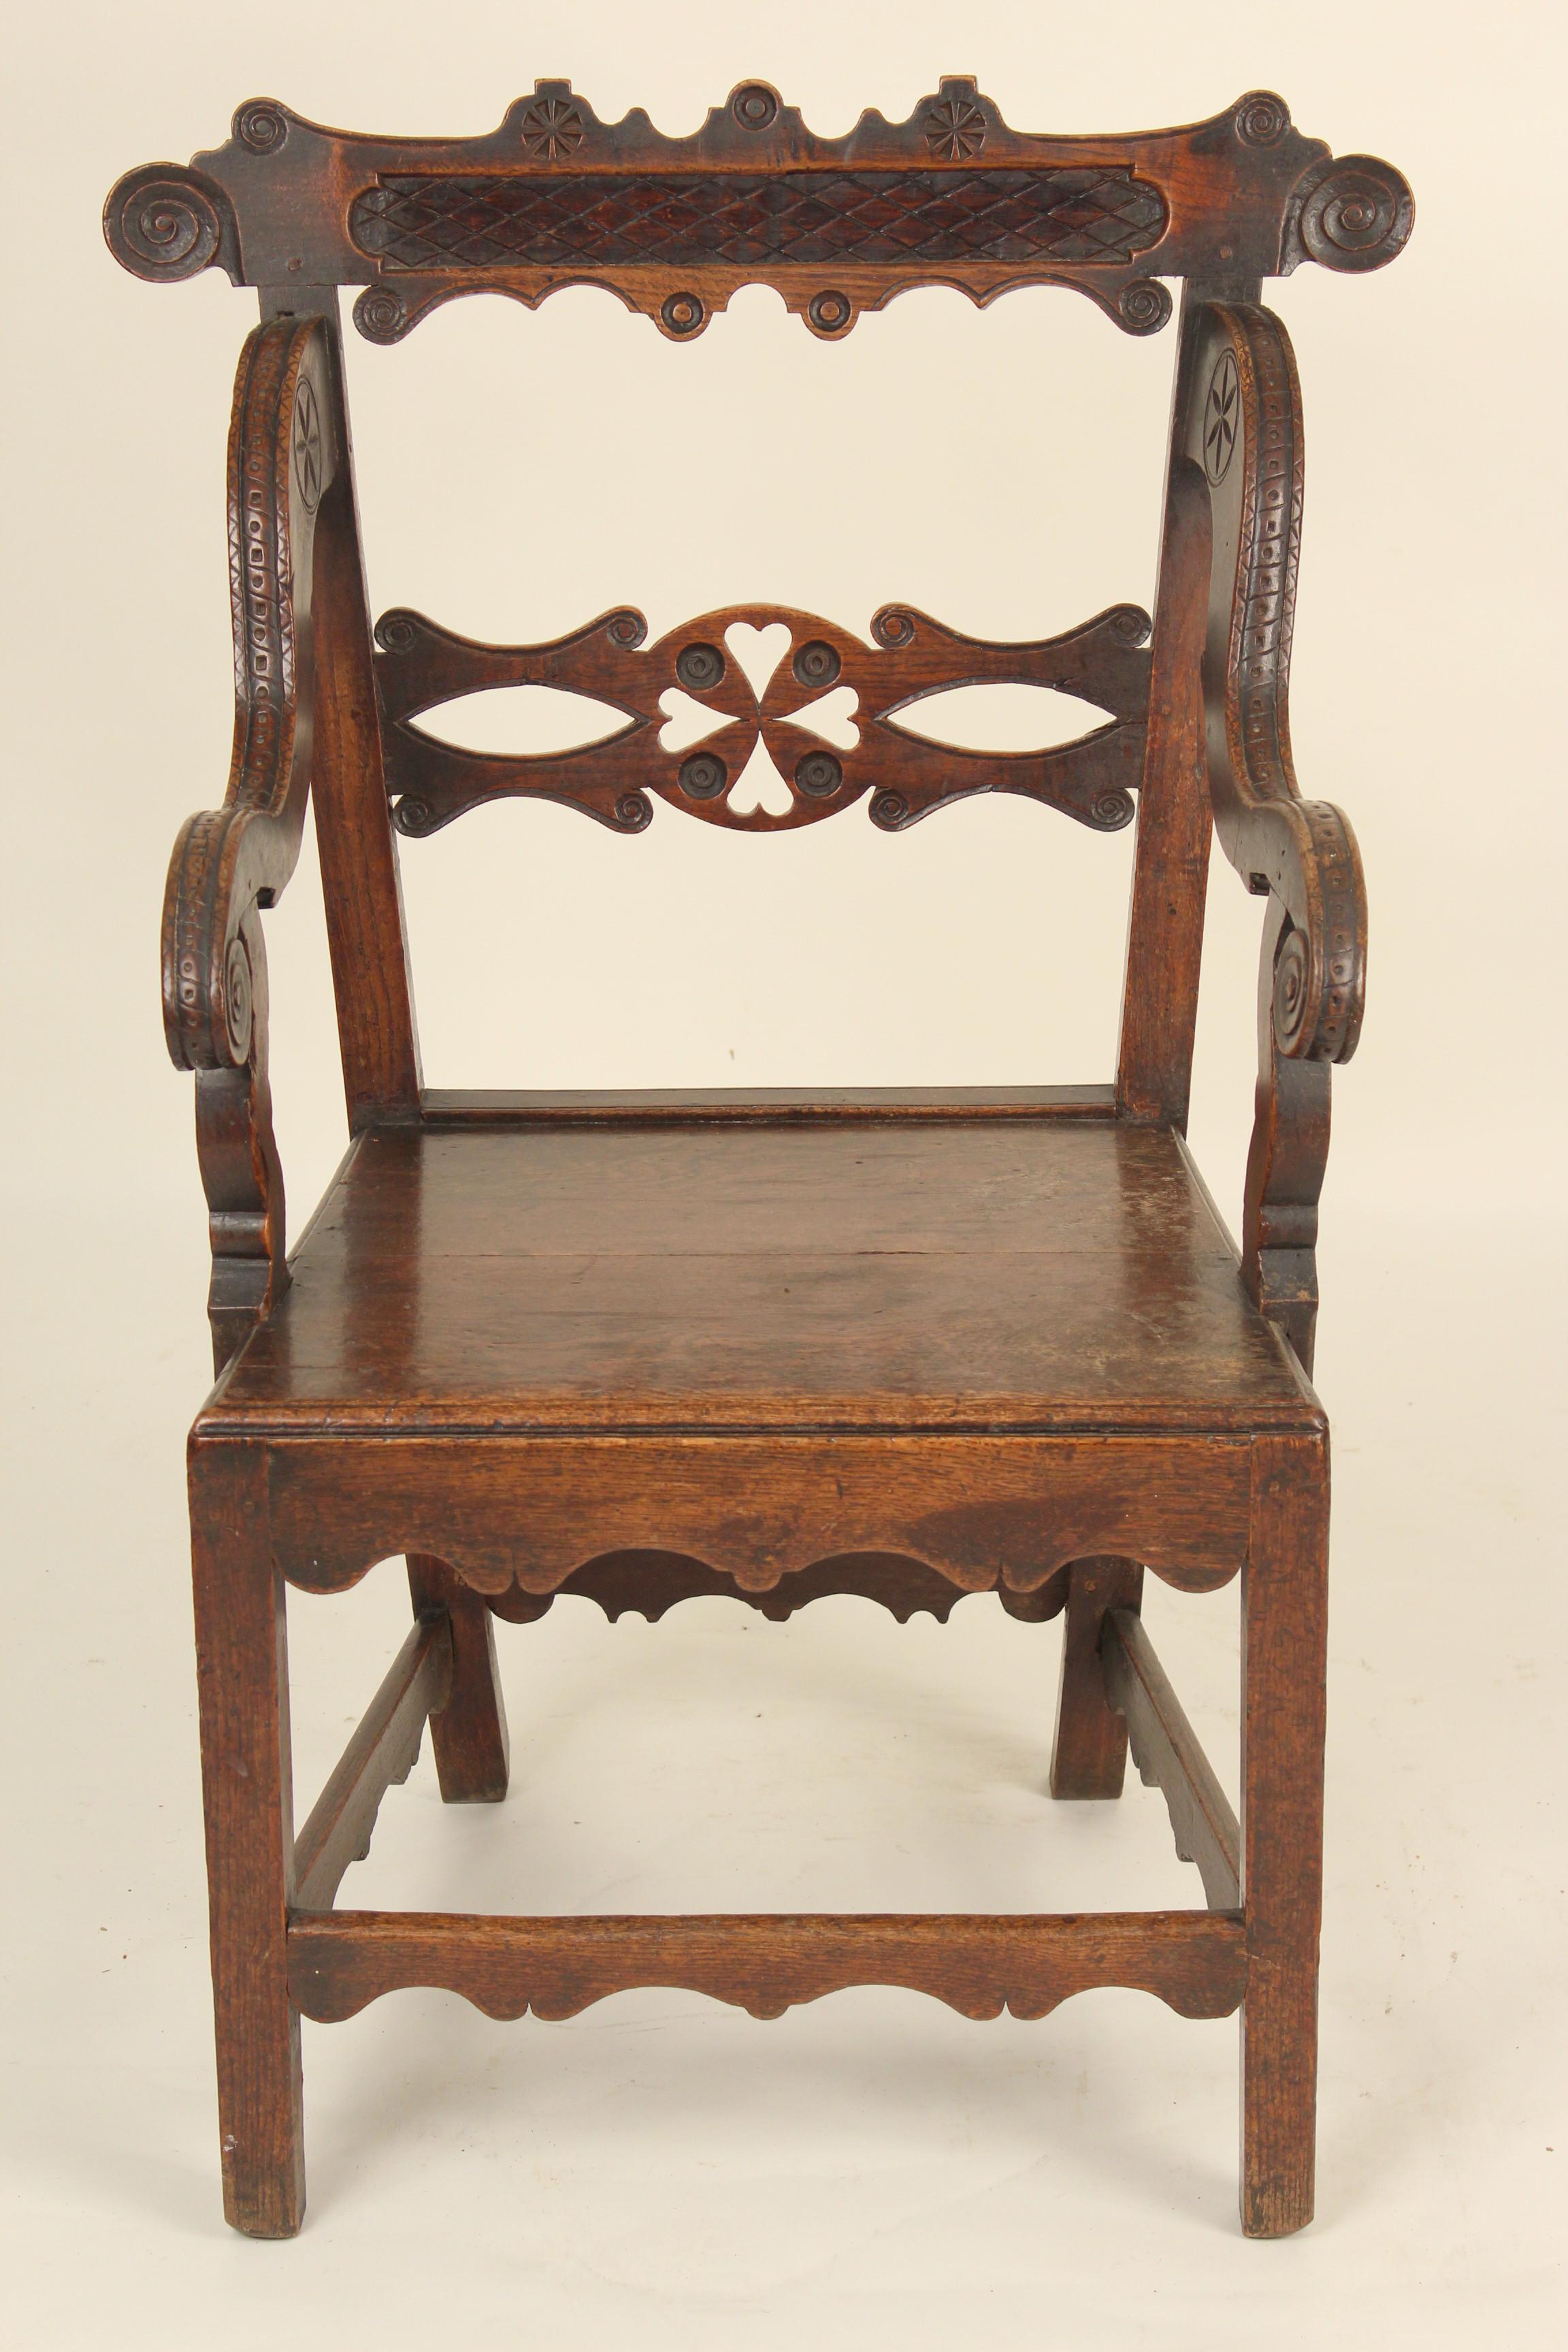 Unusual country English oak armchair, circa 1828. Inscription on the back of the crest rail reads 